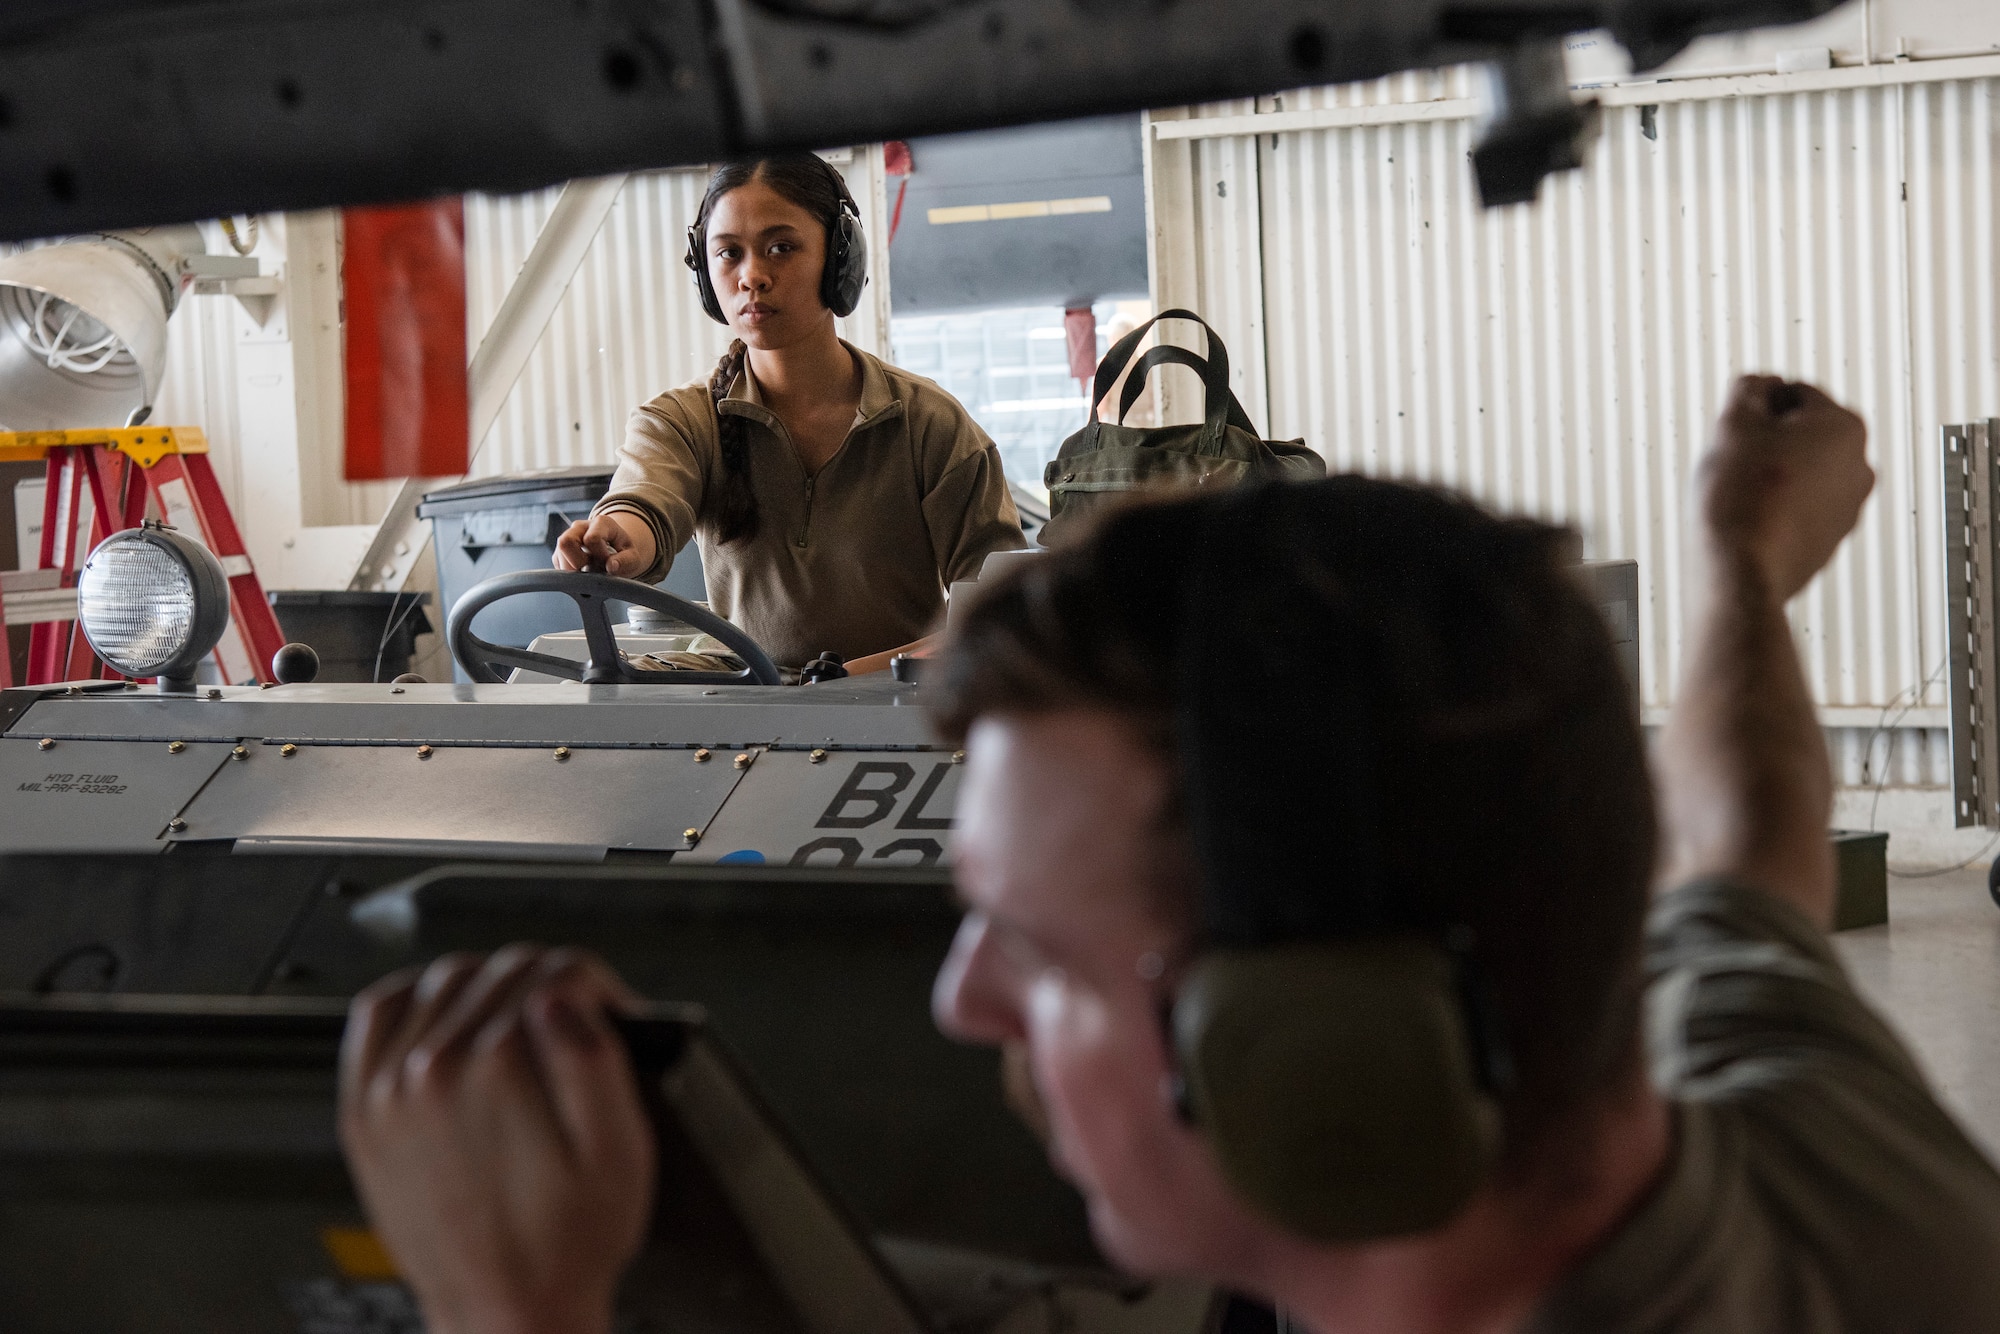 Airman 1st Class Alexandria Magtibay, background, 336th Fighter Generation Squadron weapons load crew member, transports an unarmed practice munition to an F-15E Strike Eagle.